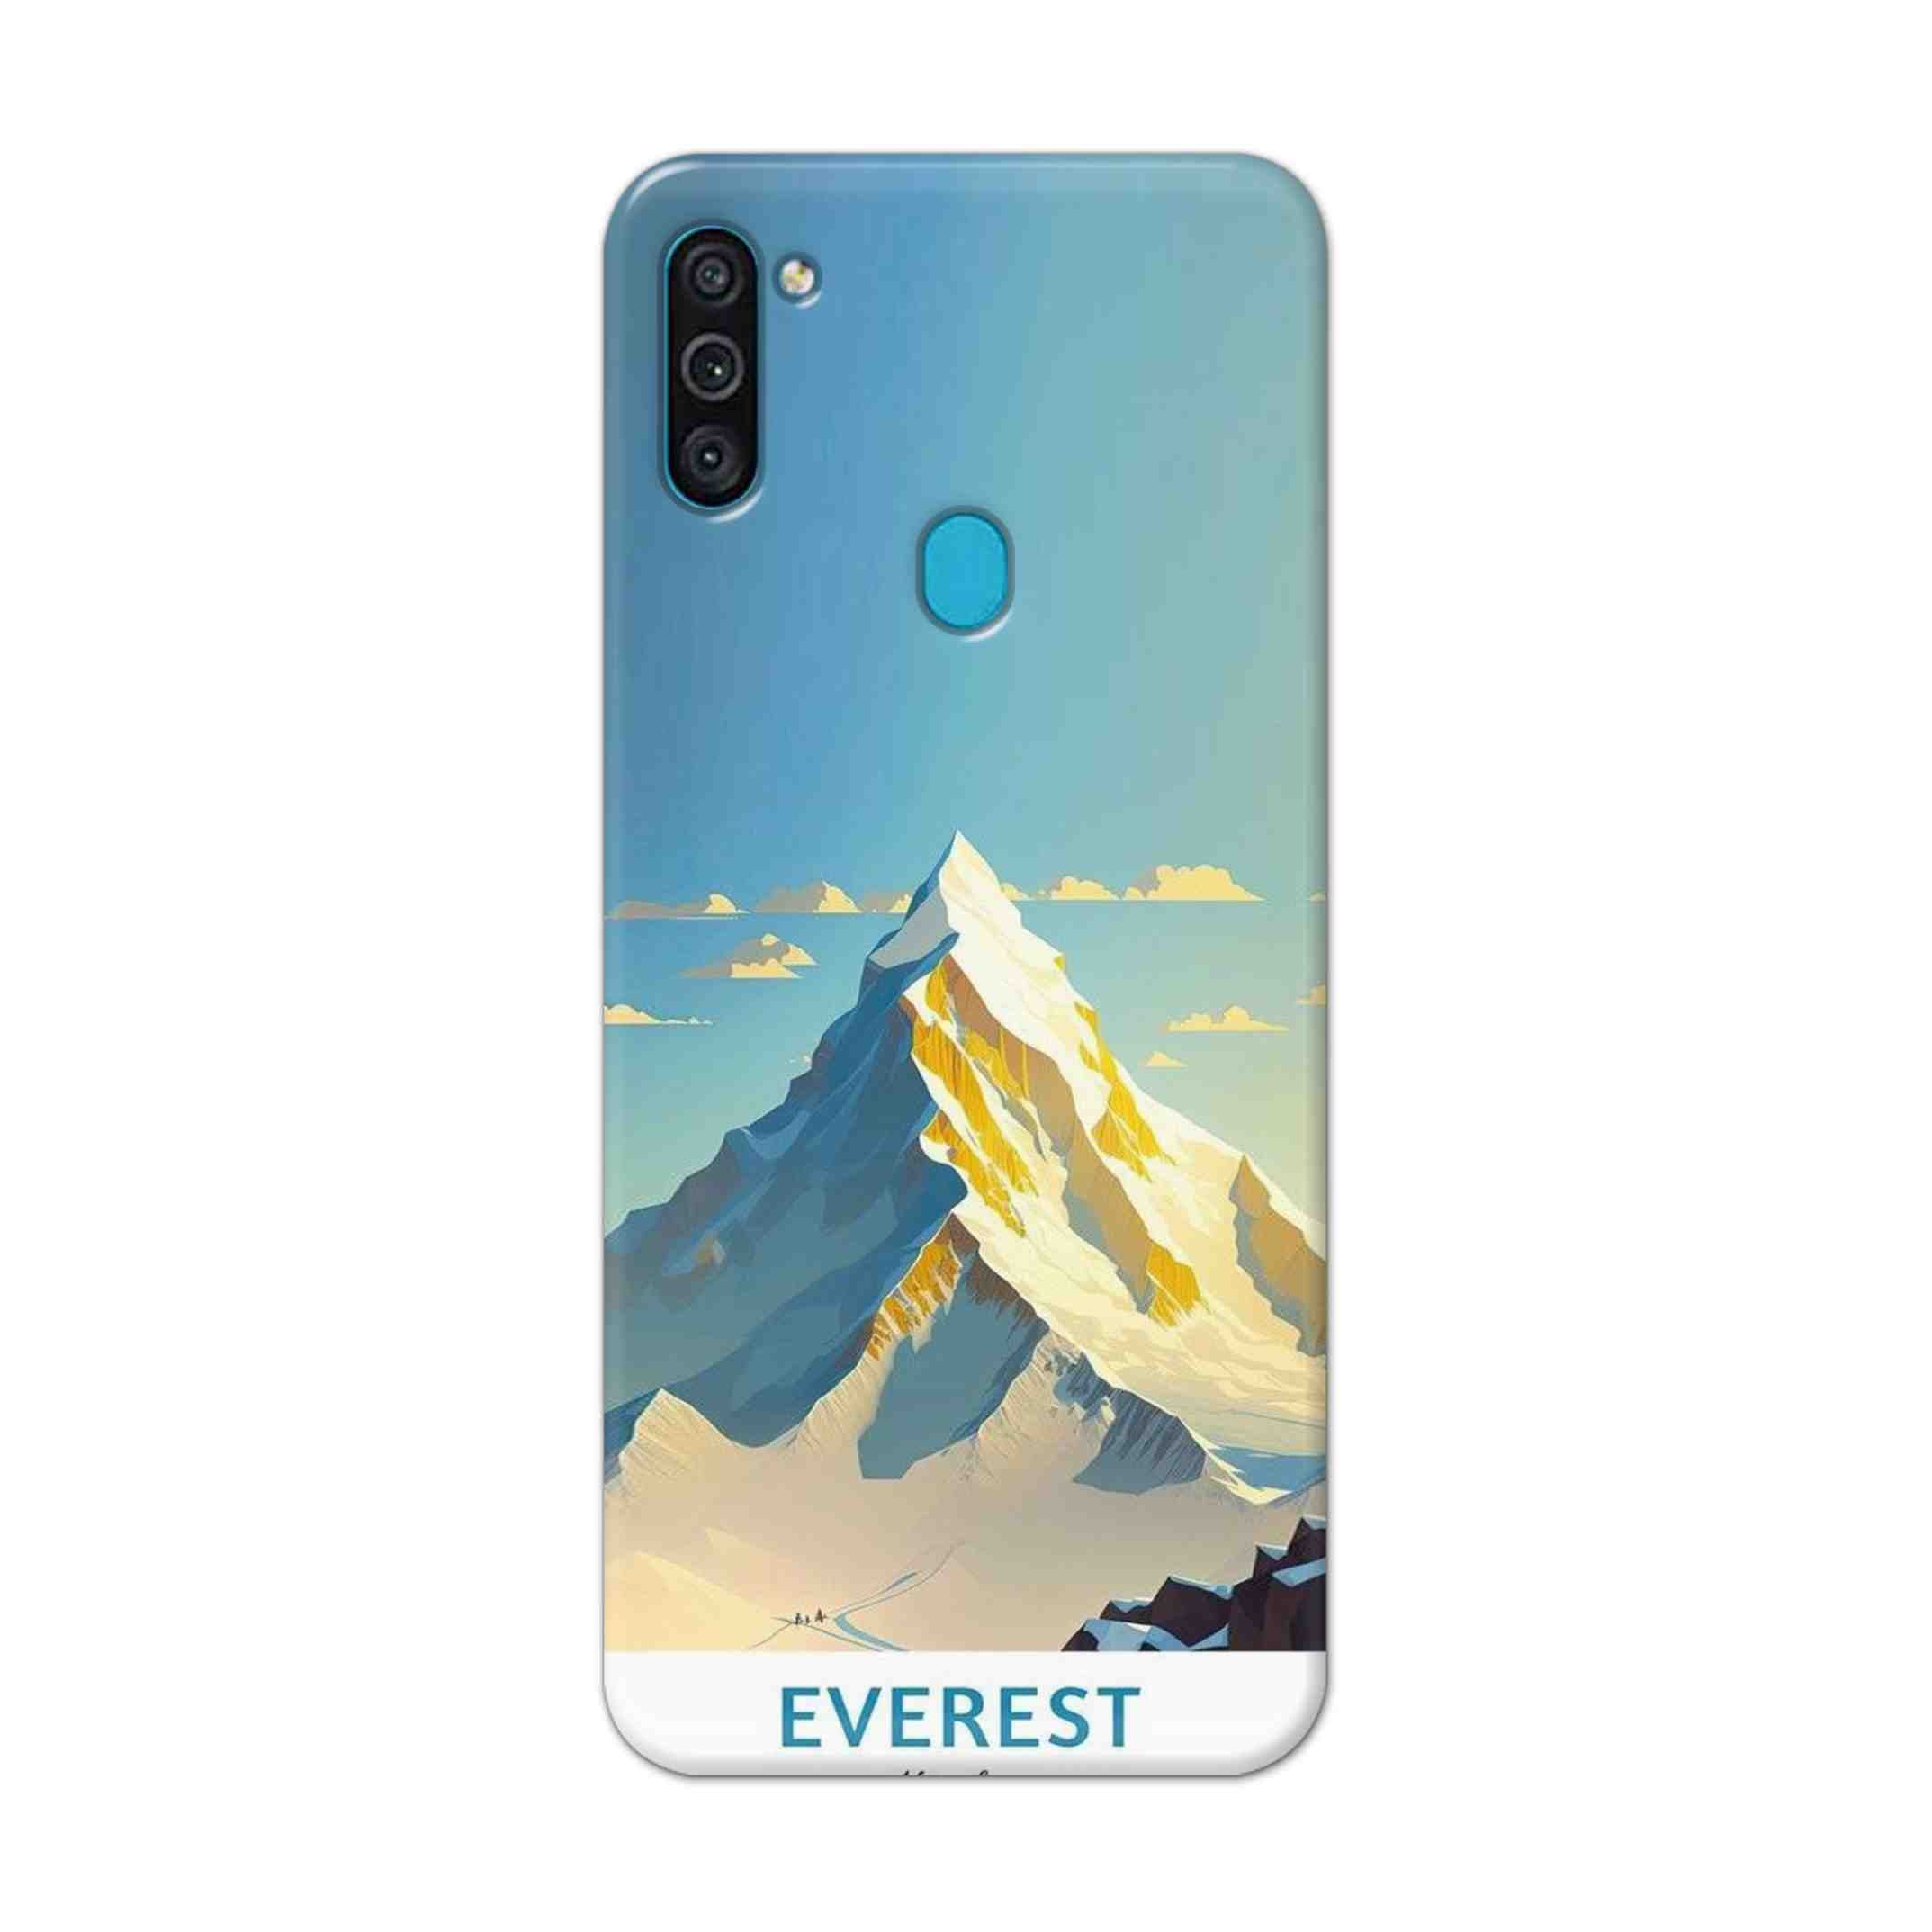 Buy Everest Hard Back Mobile Phone Case Cover For Samsung Galaxy M11 Online